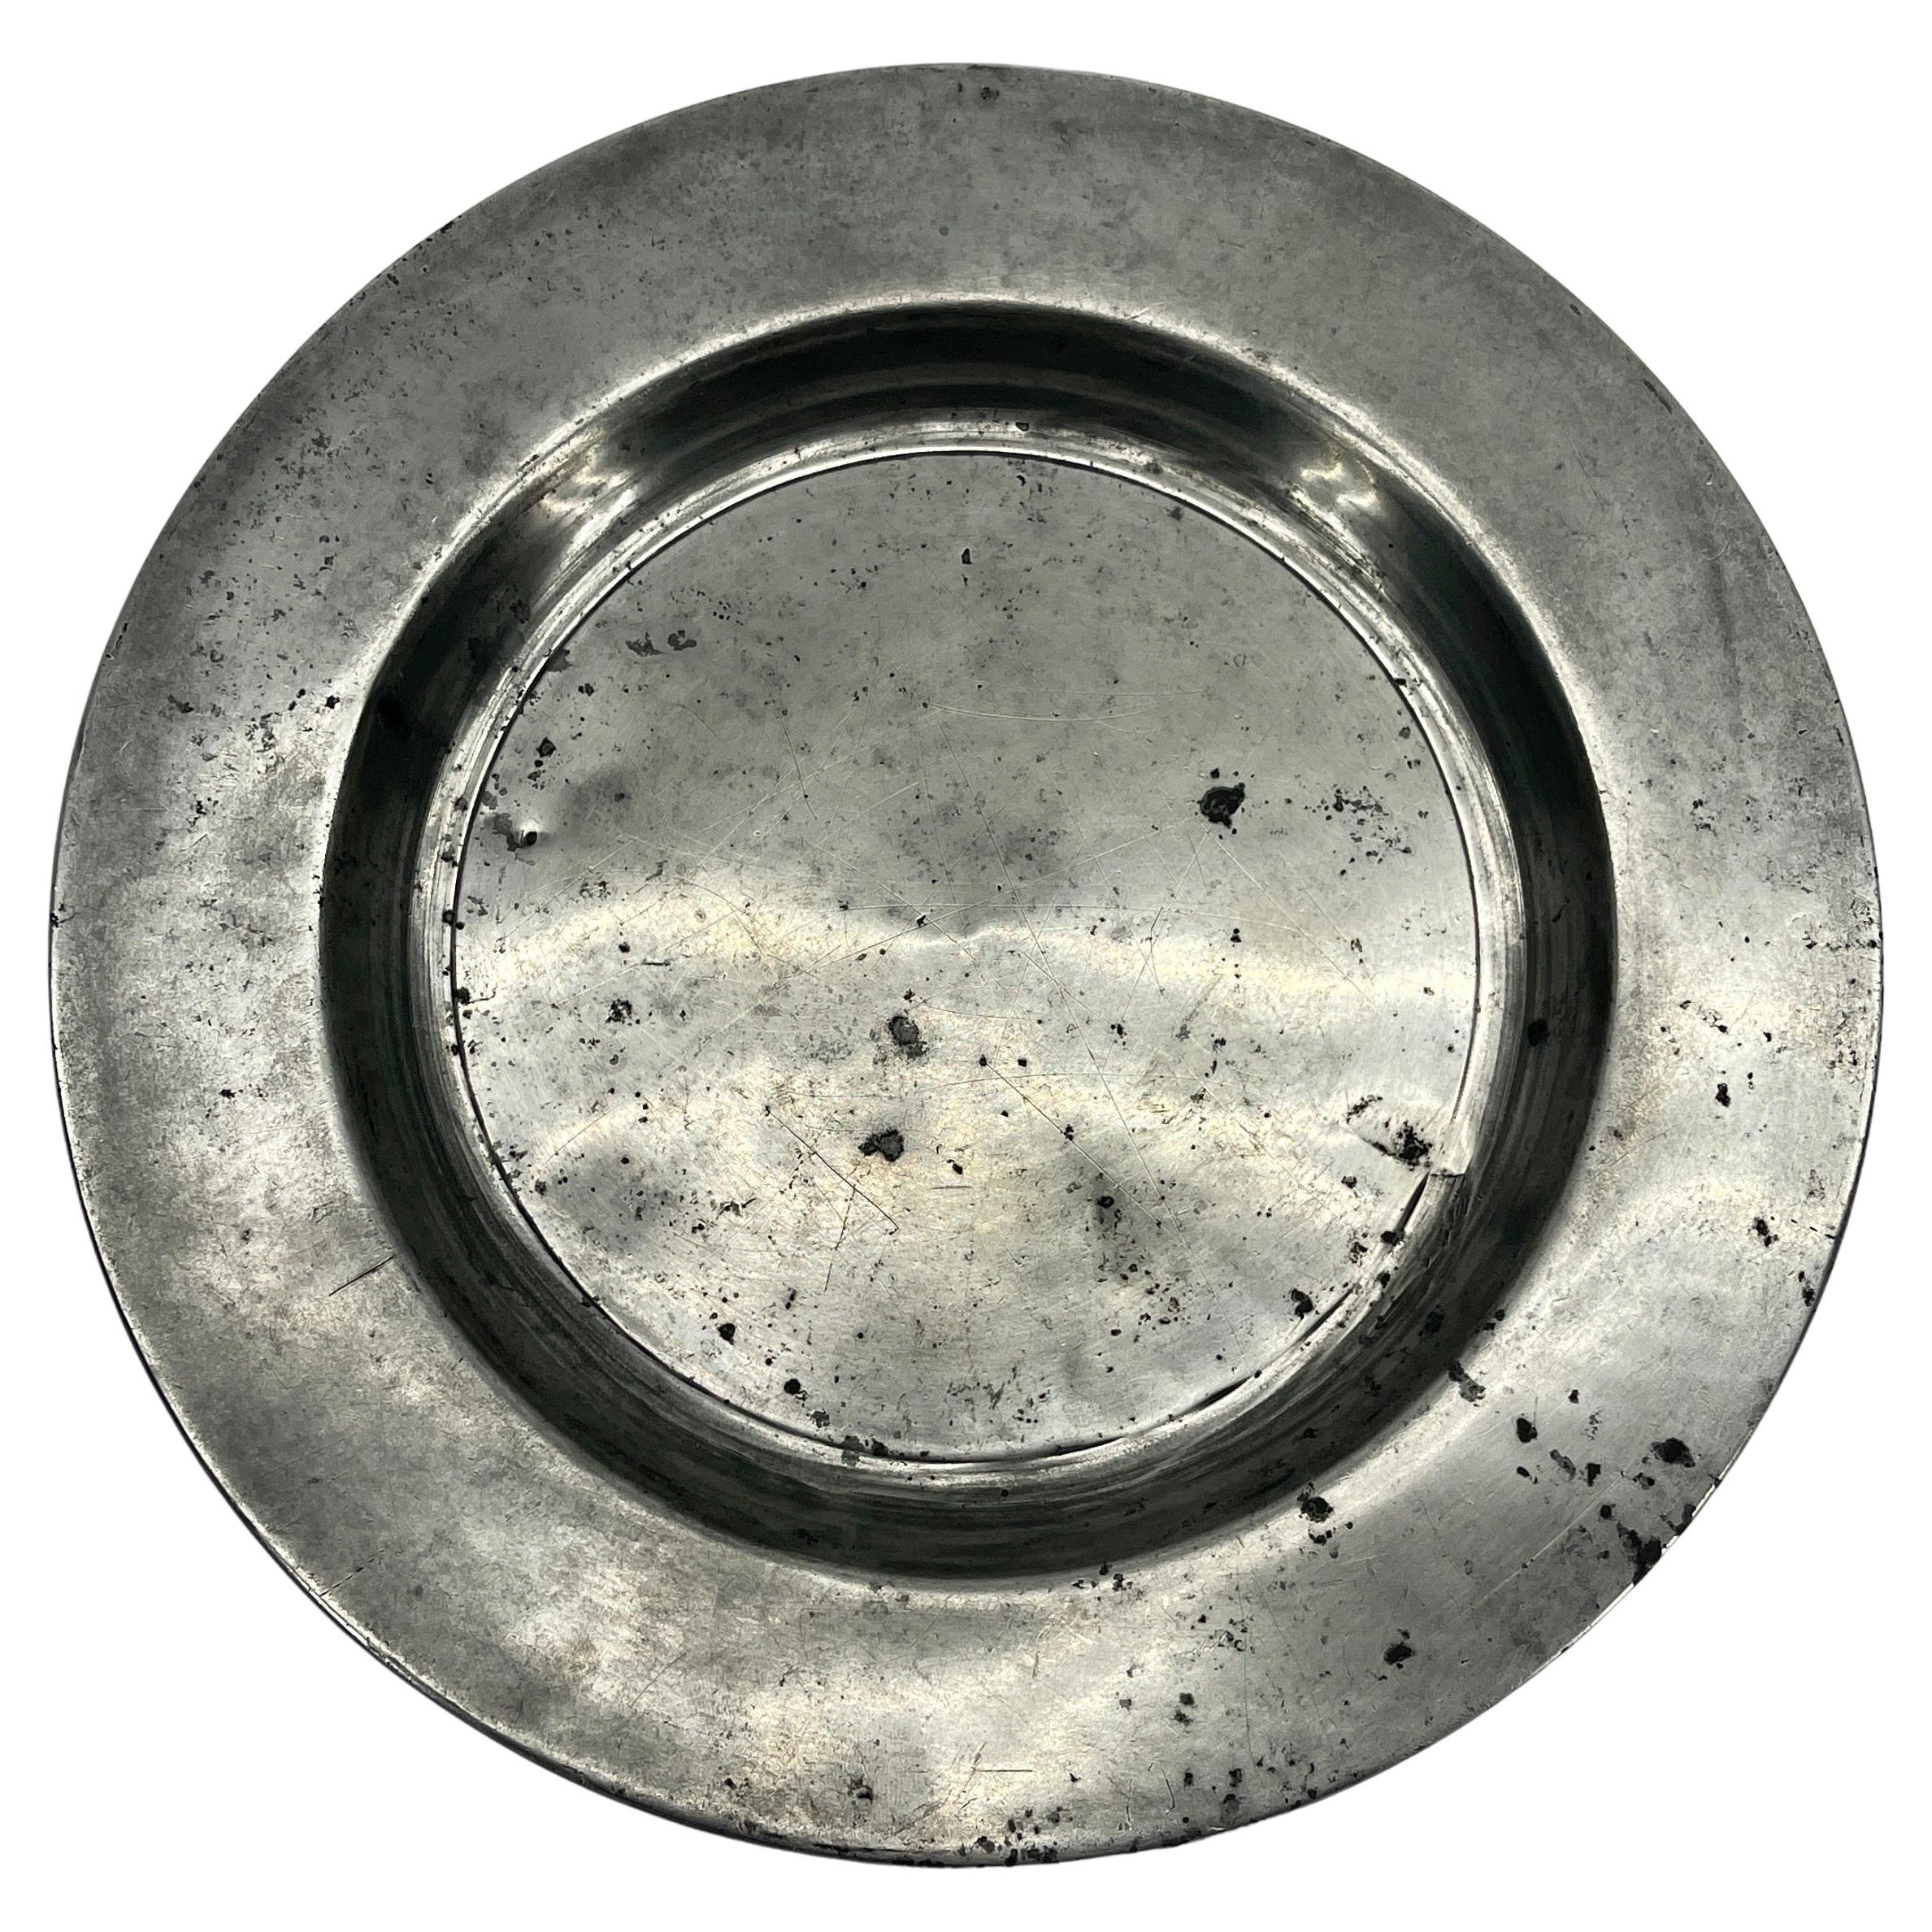 Small round pewter plate with London and makers mark on the rear side.